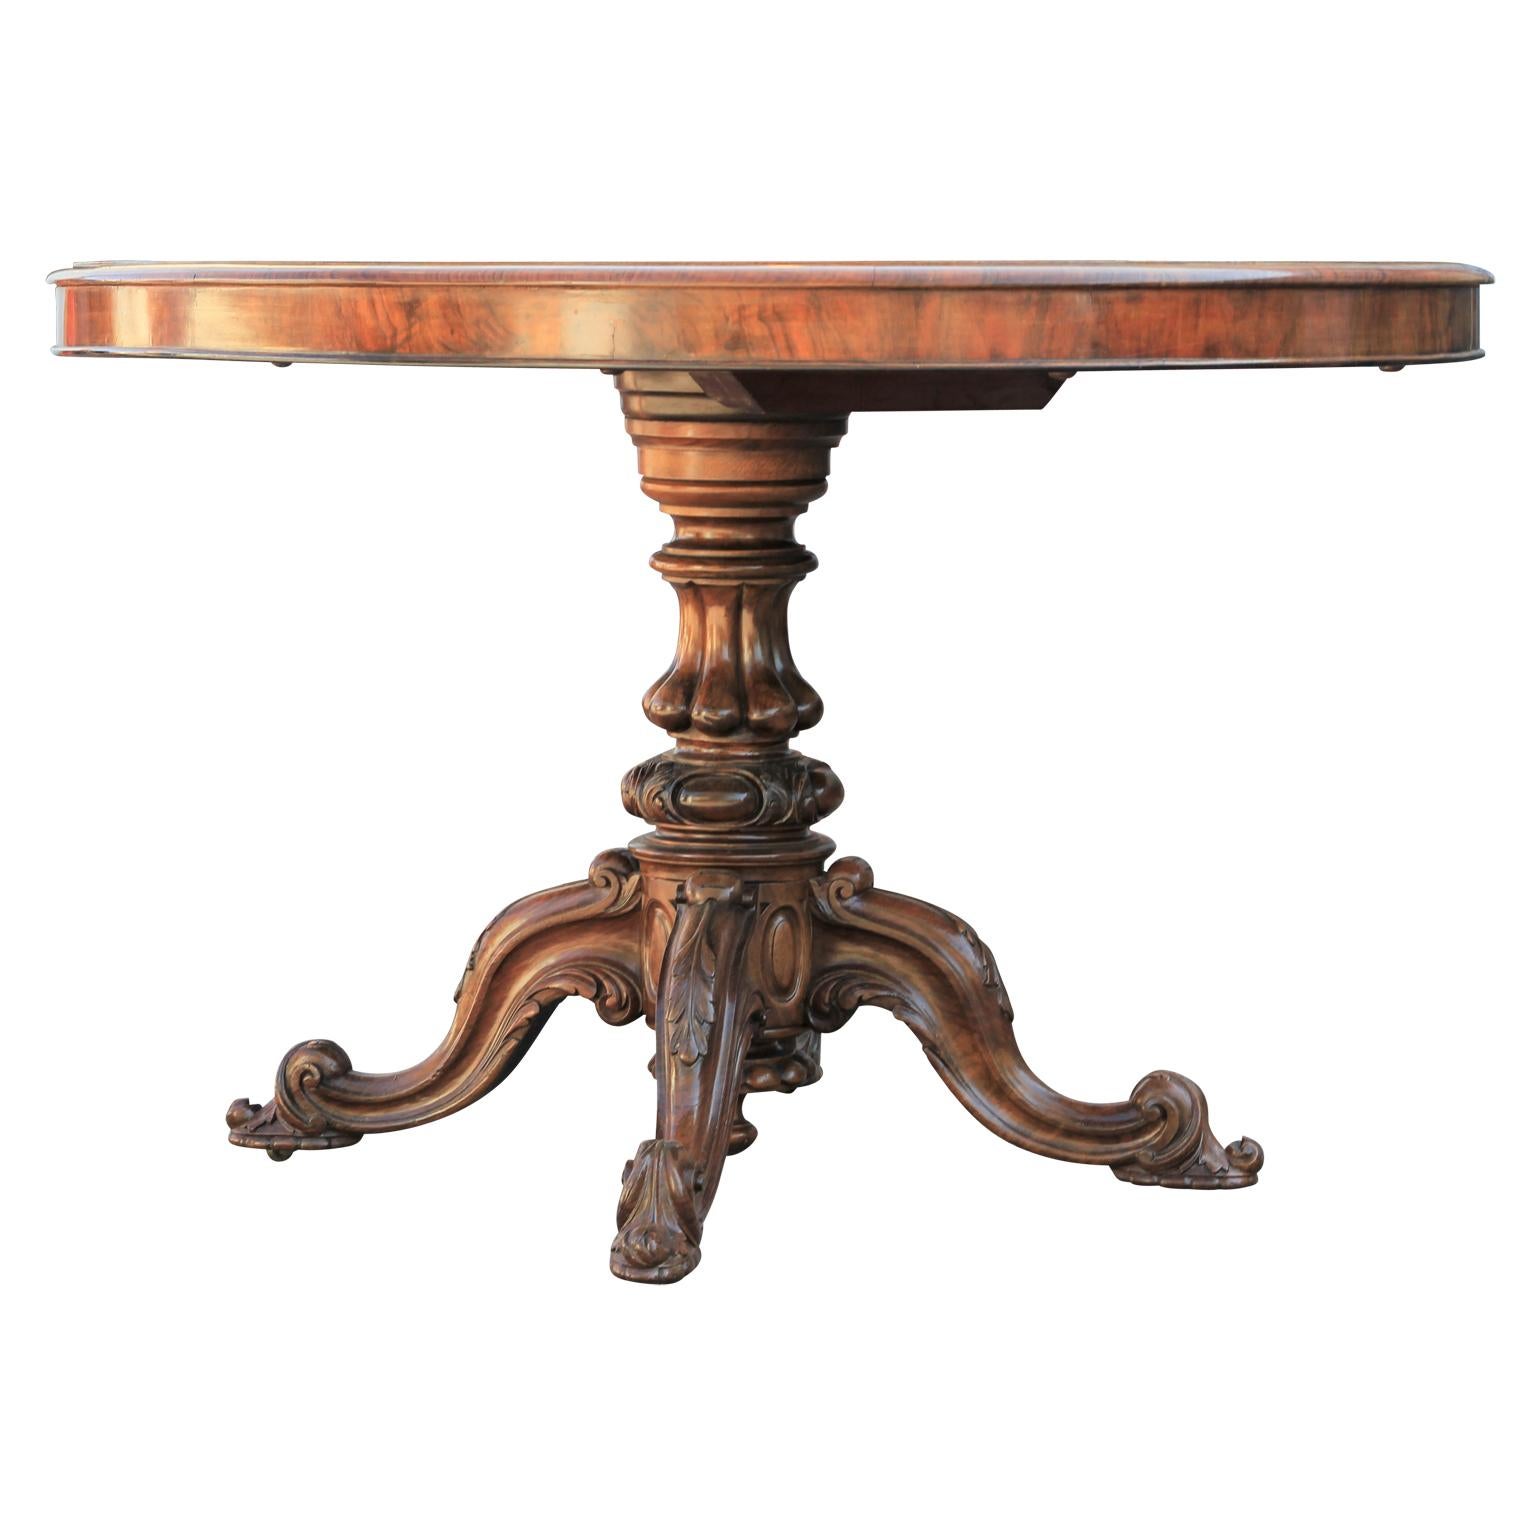 A late 19th century oval center table with beautiful quarter veneered burr walnut tilt-top accented with satinwood inlaid details on each corner. The top is supported by a sturdy base with four curved legs. This piece is in great antique condition